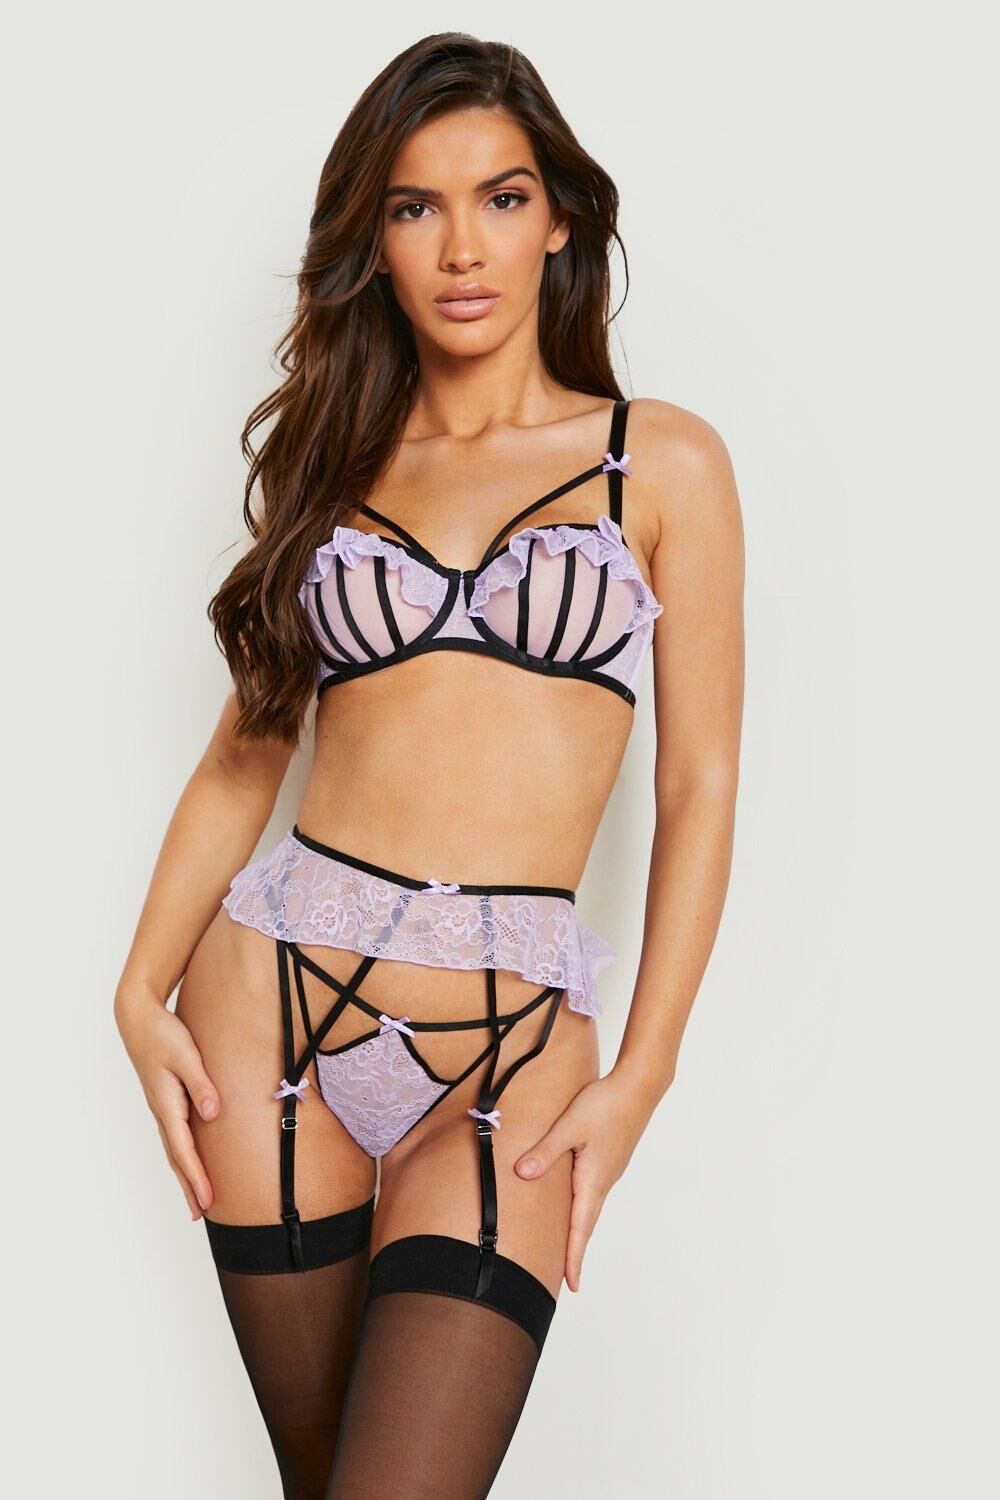 Boohoo Premium Lace Frill And Cage Detail Cut Out Bra- Purple  - Size: 36C